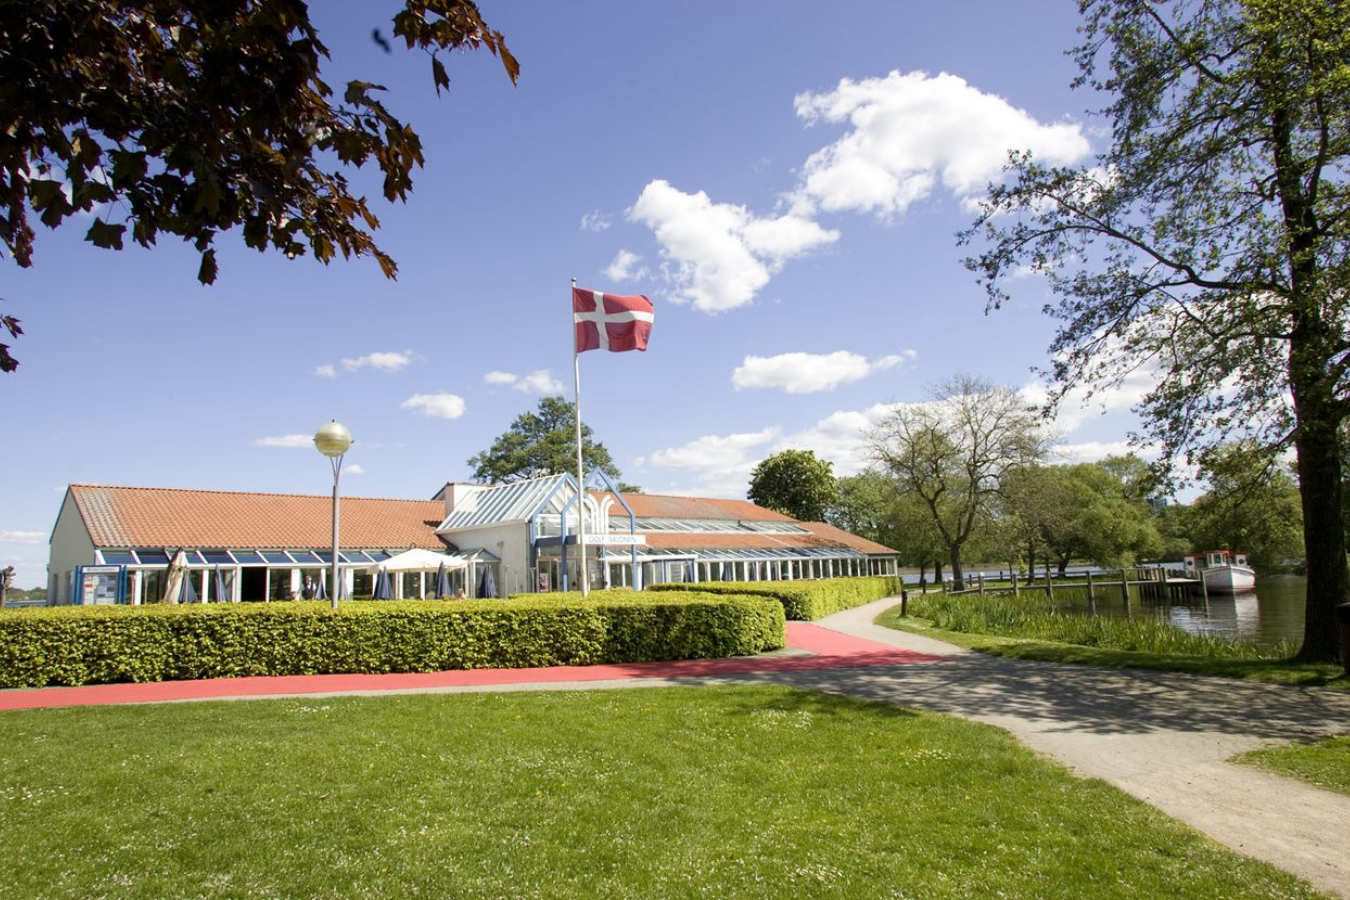 Golf Hotel Viborg <br/>211.81 ew <br/> <a href='http://vakantieoplossing.nl/outpage/?id=a8403ab0bf50b7651f8937cbc53cbbb2' target='_blank'>View Details</a>